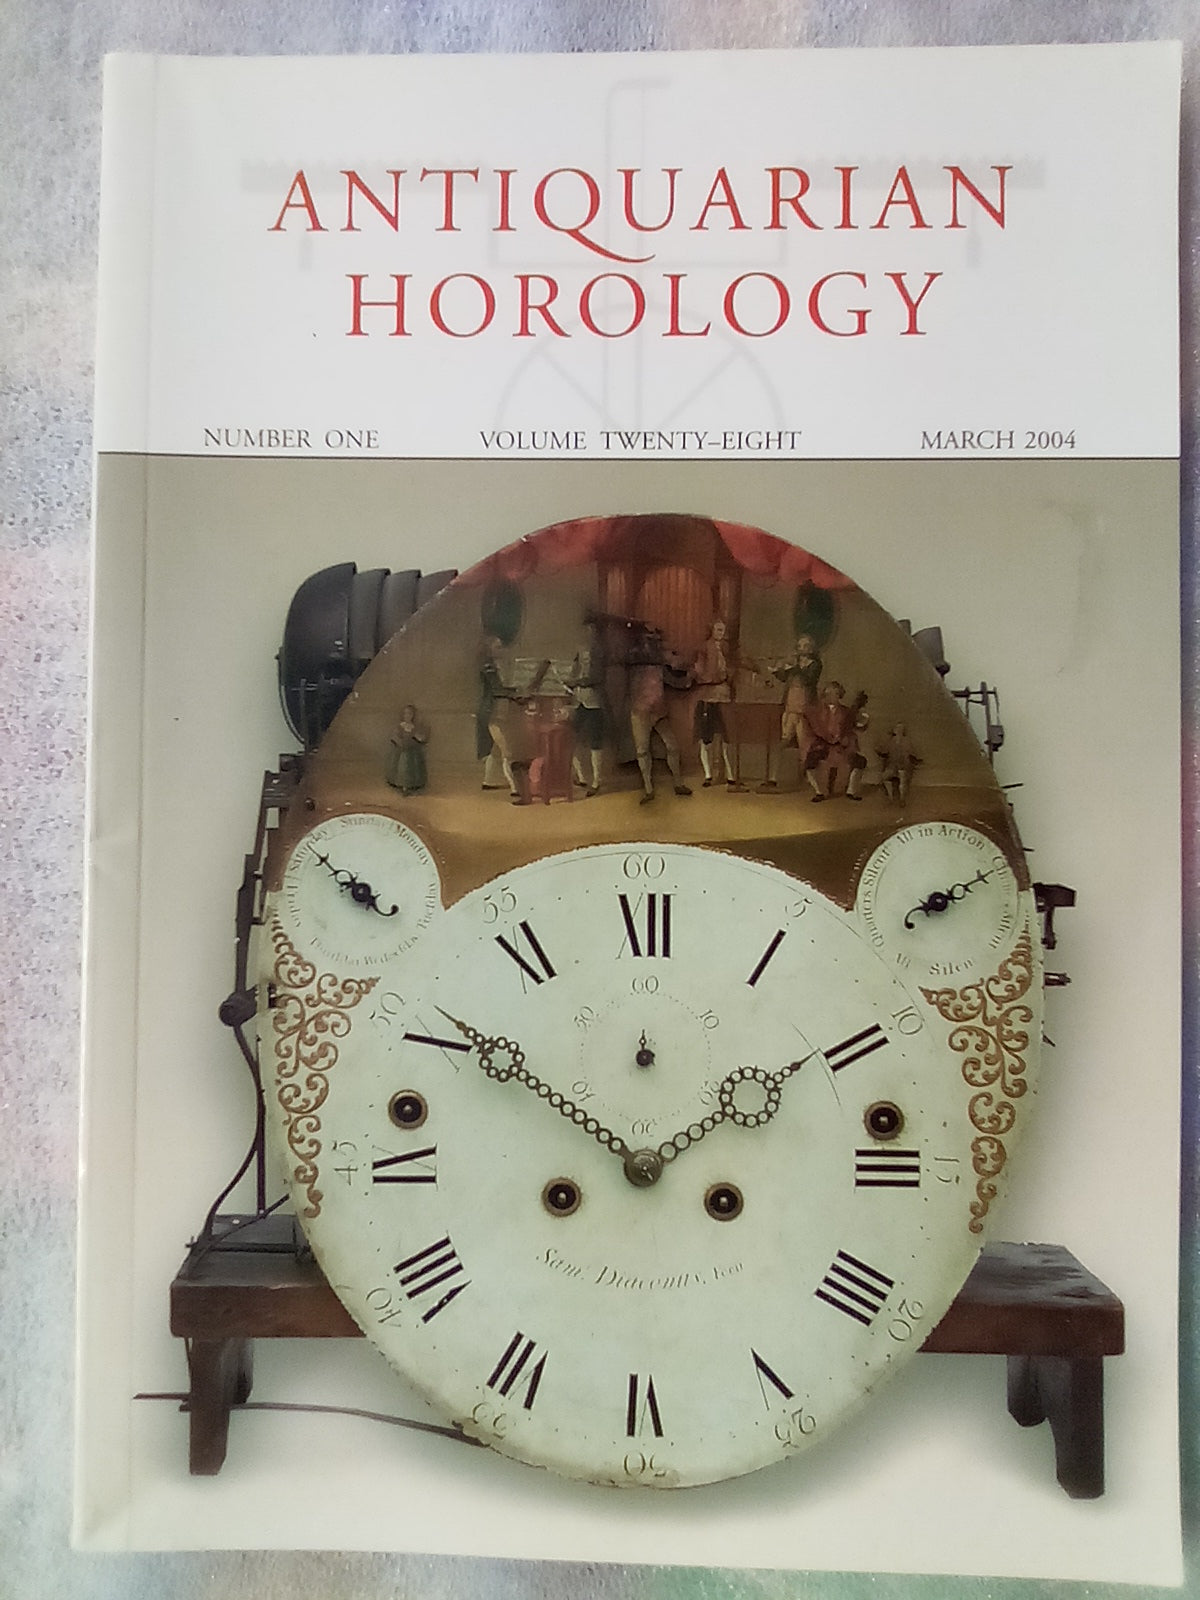 Antiquarian Horology Journal - 7 Issues from 2004-2009